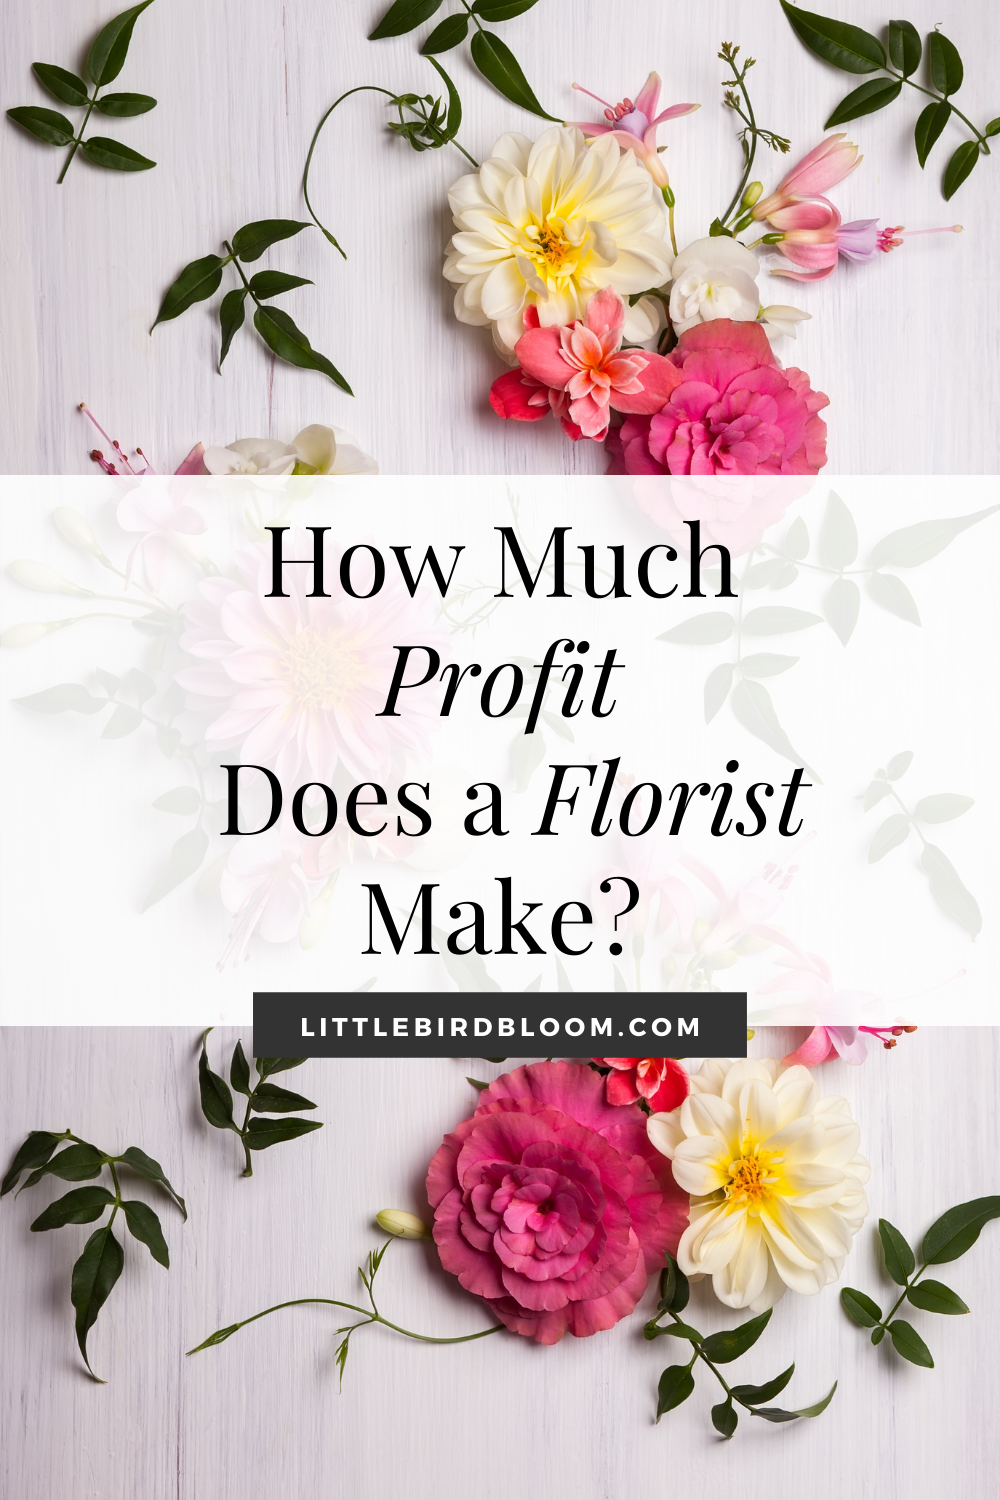 How much profit does a florist make?